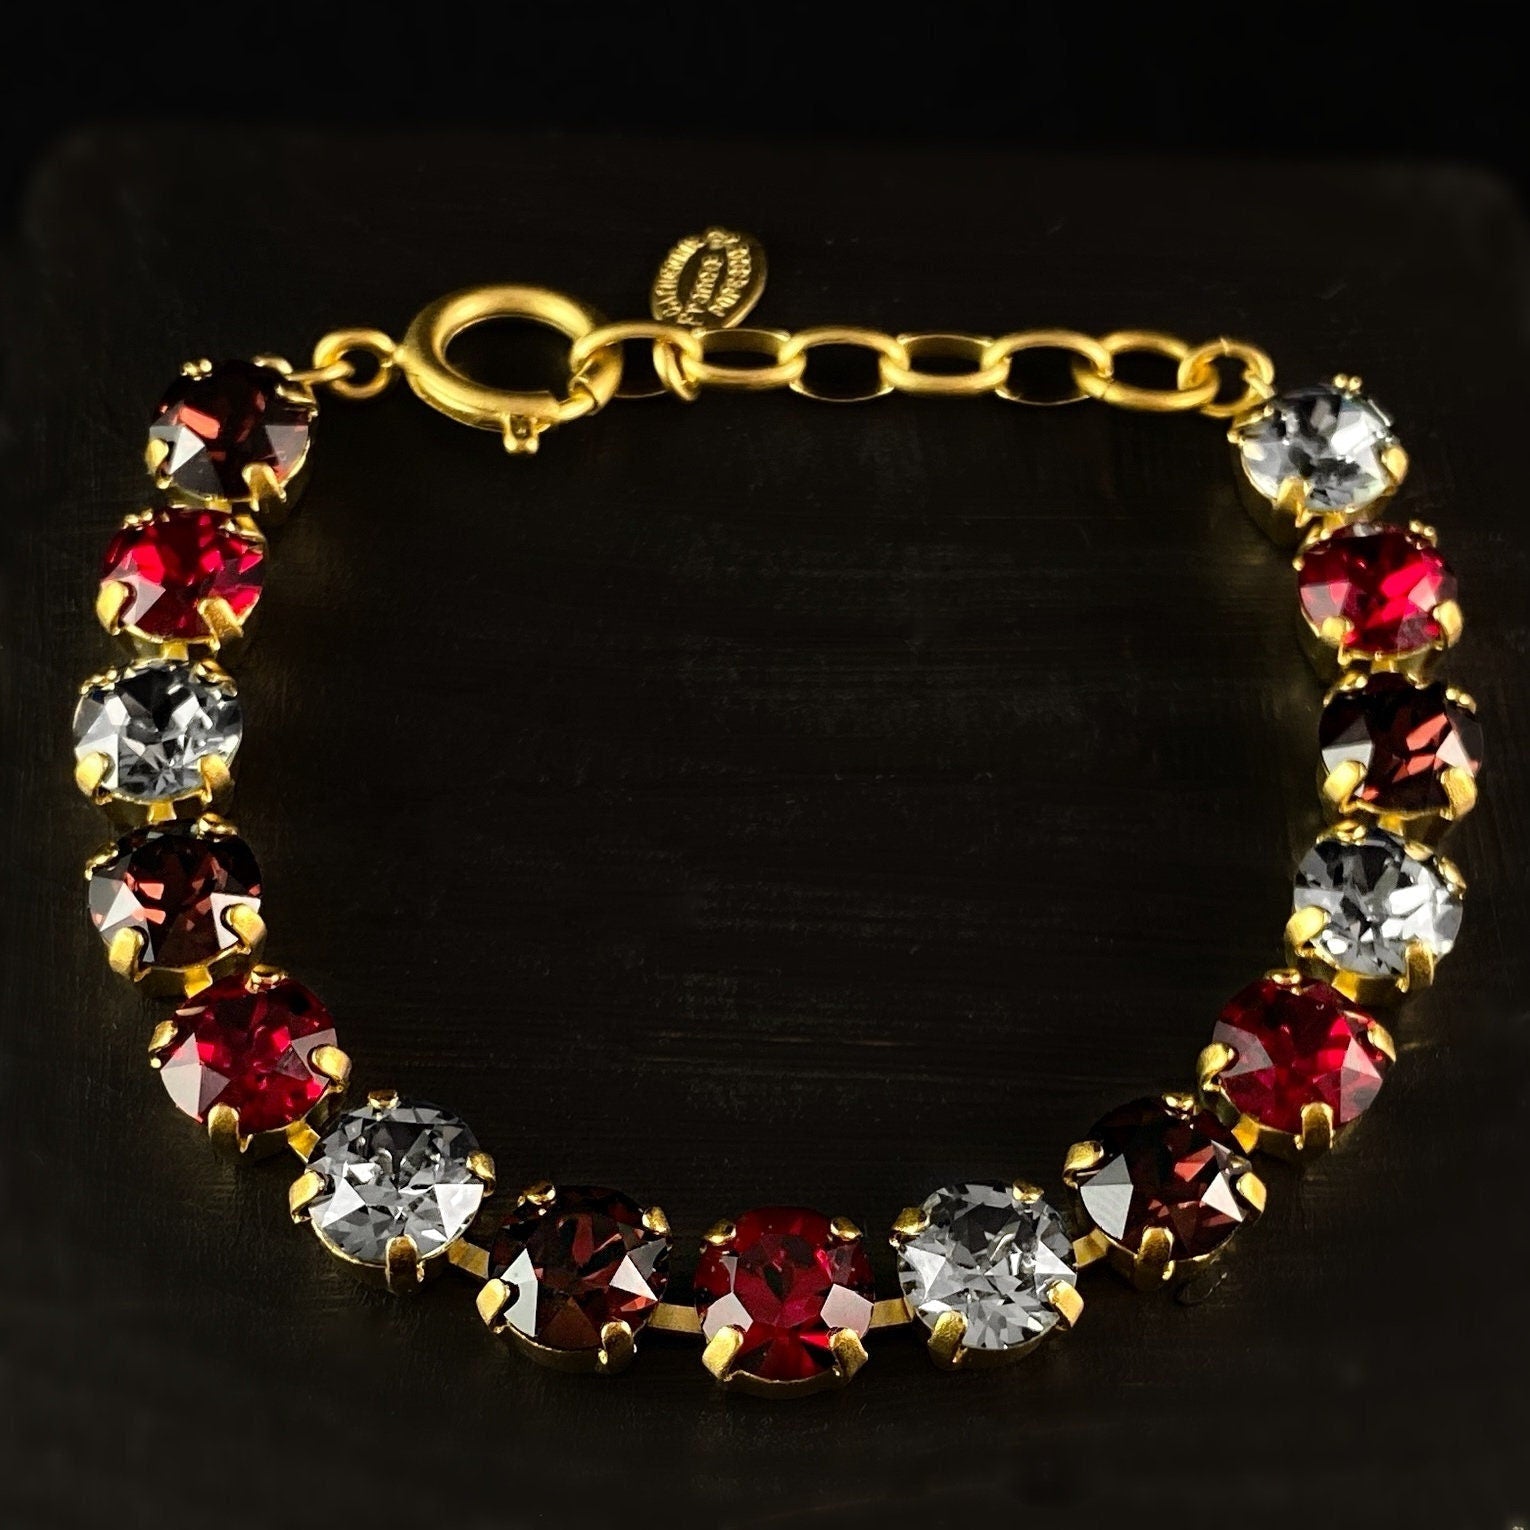 Multicolor Swarovski Crystal Bracelet with Red, Gray, and Purple Crystals - La Vie Parisienne by Catherine Popesco